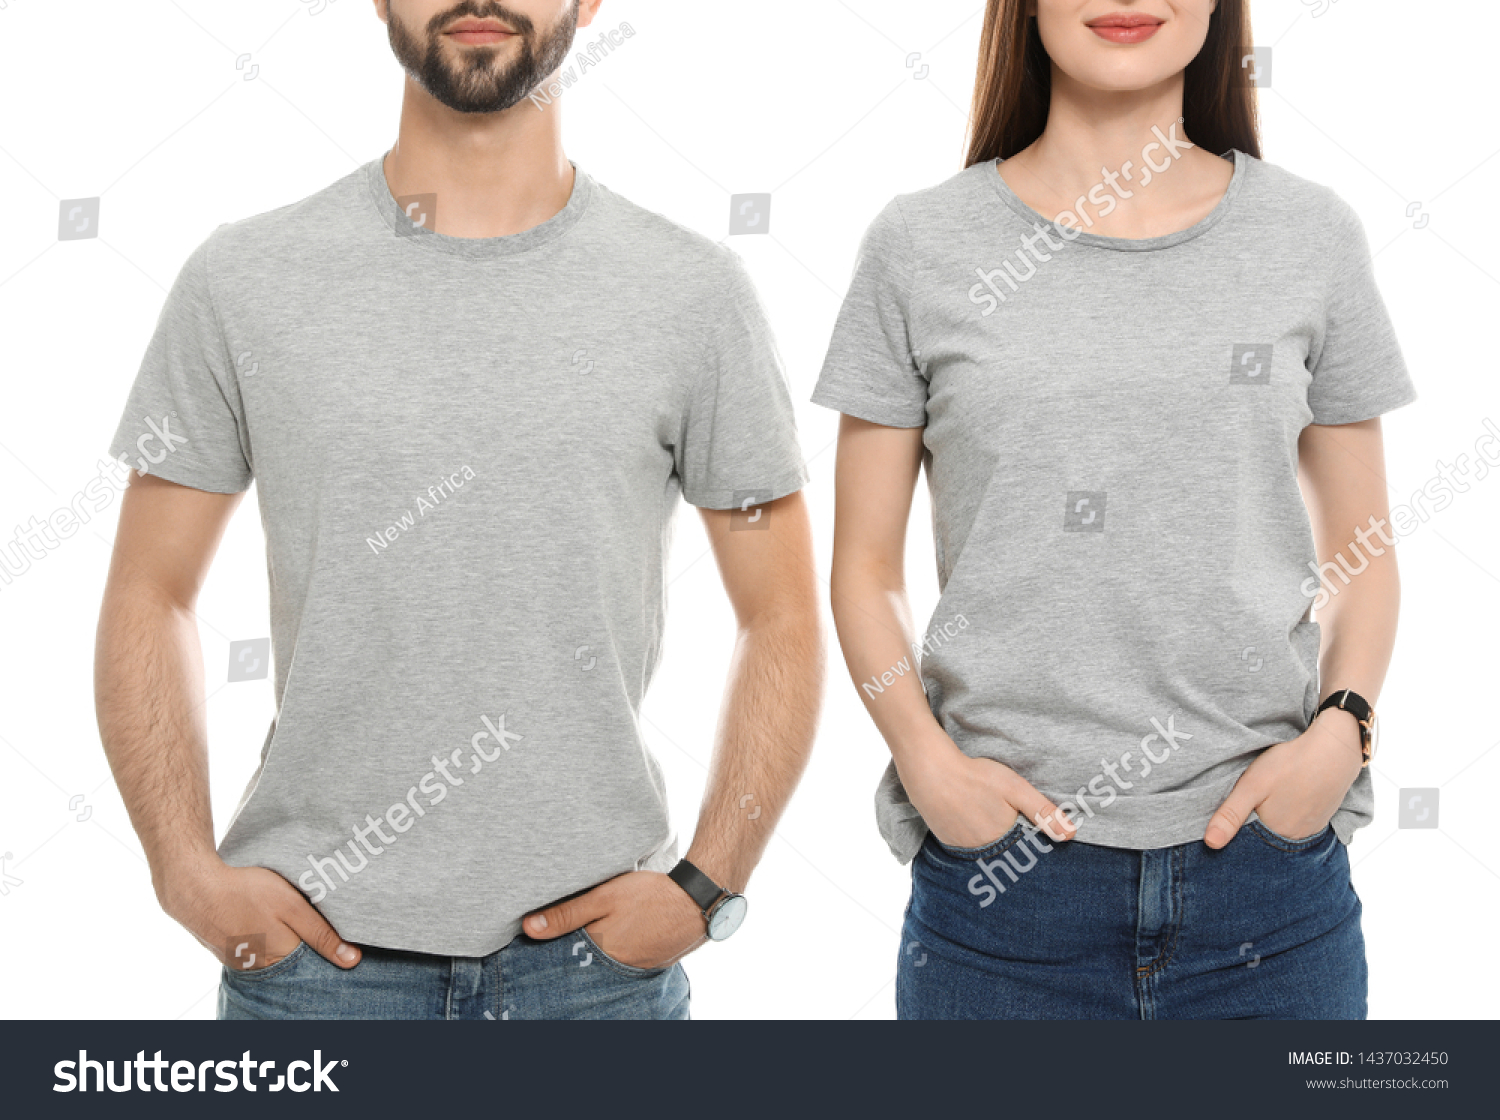 Young people in t-shirts on white background, closeup. Mock up for design #1437032450